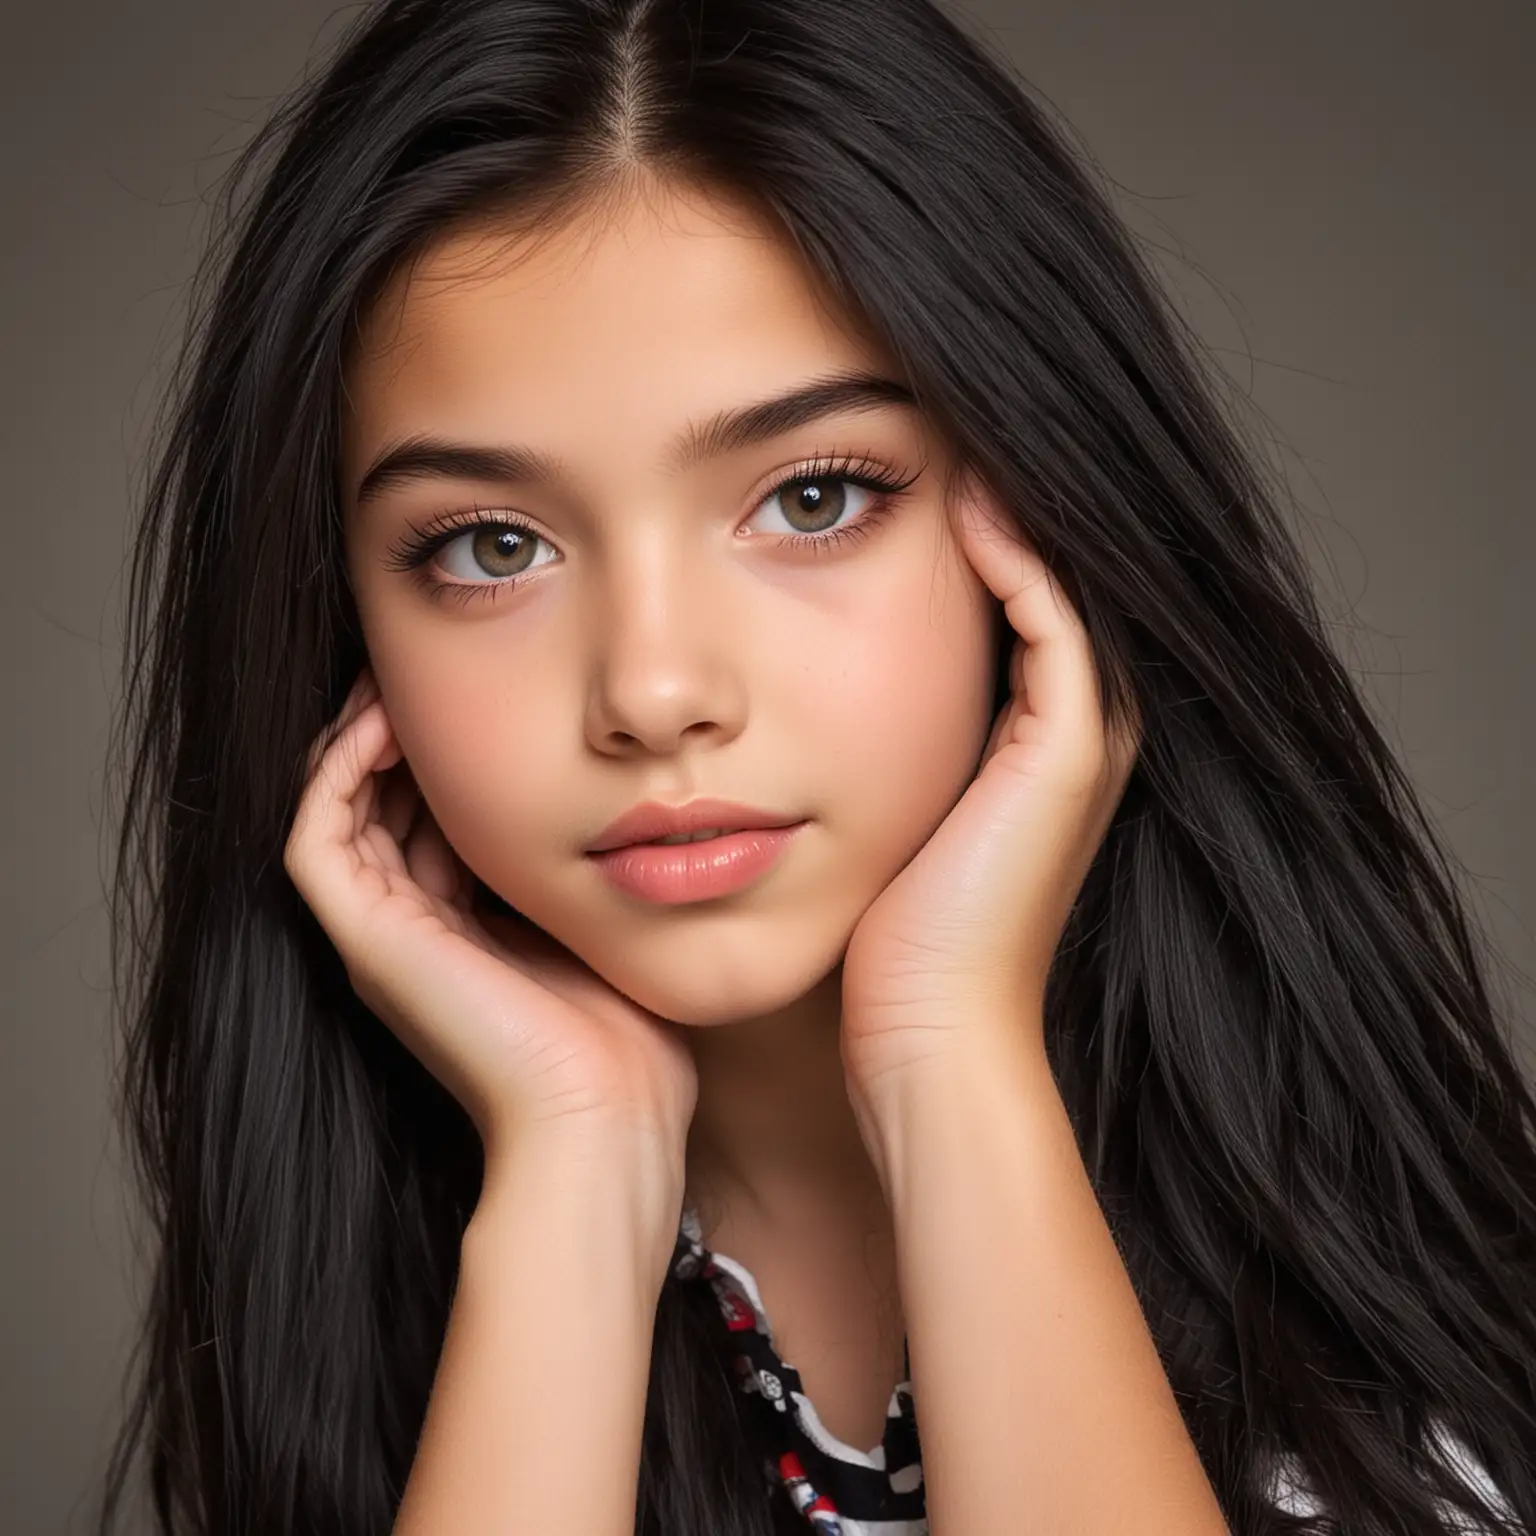 BlackHaired Teen Model Portrait Youthful Elegance and Style